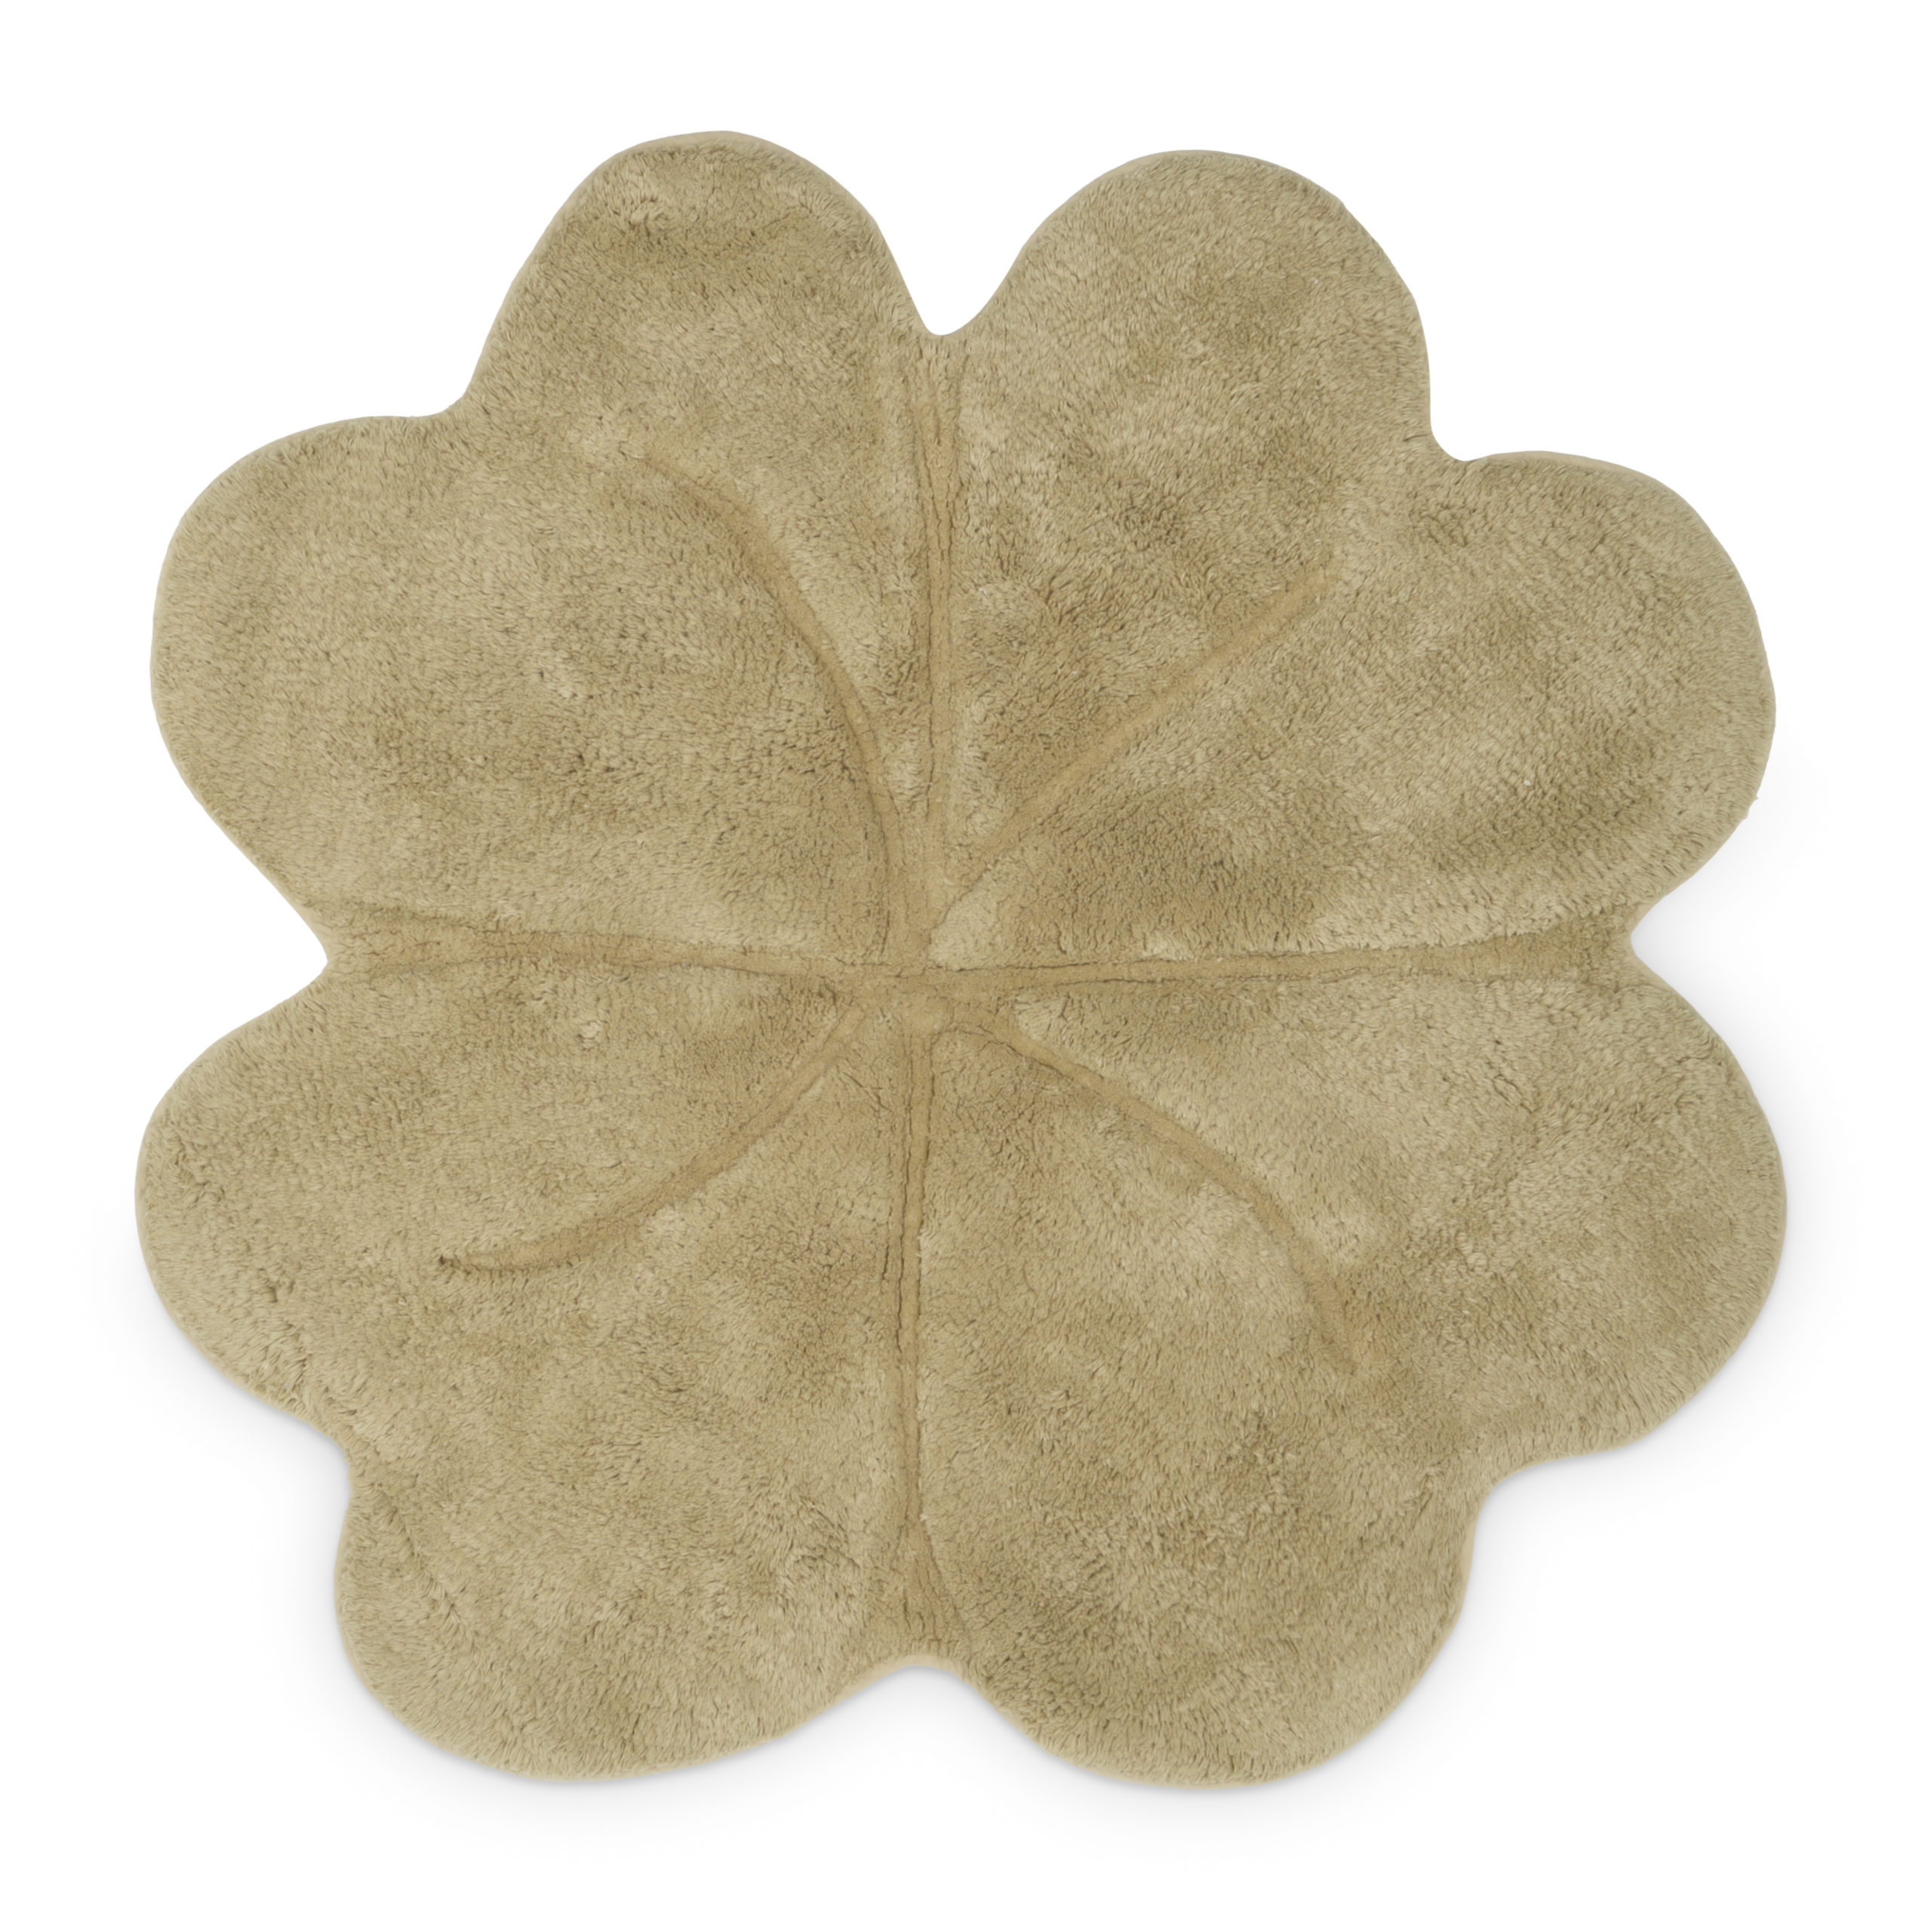 That's Mine - Clover Rug Large - Pistachio Shell (R211)